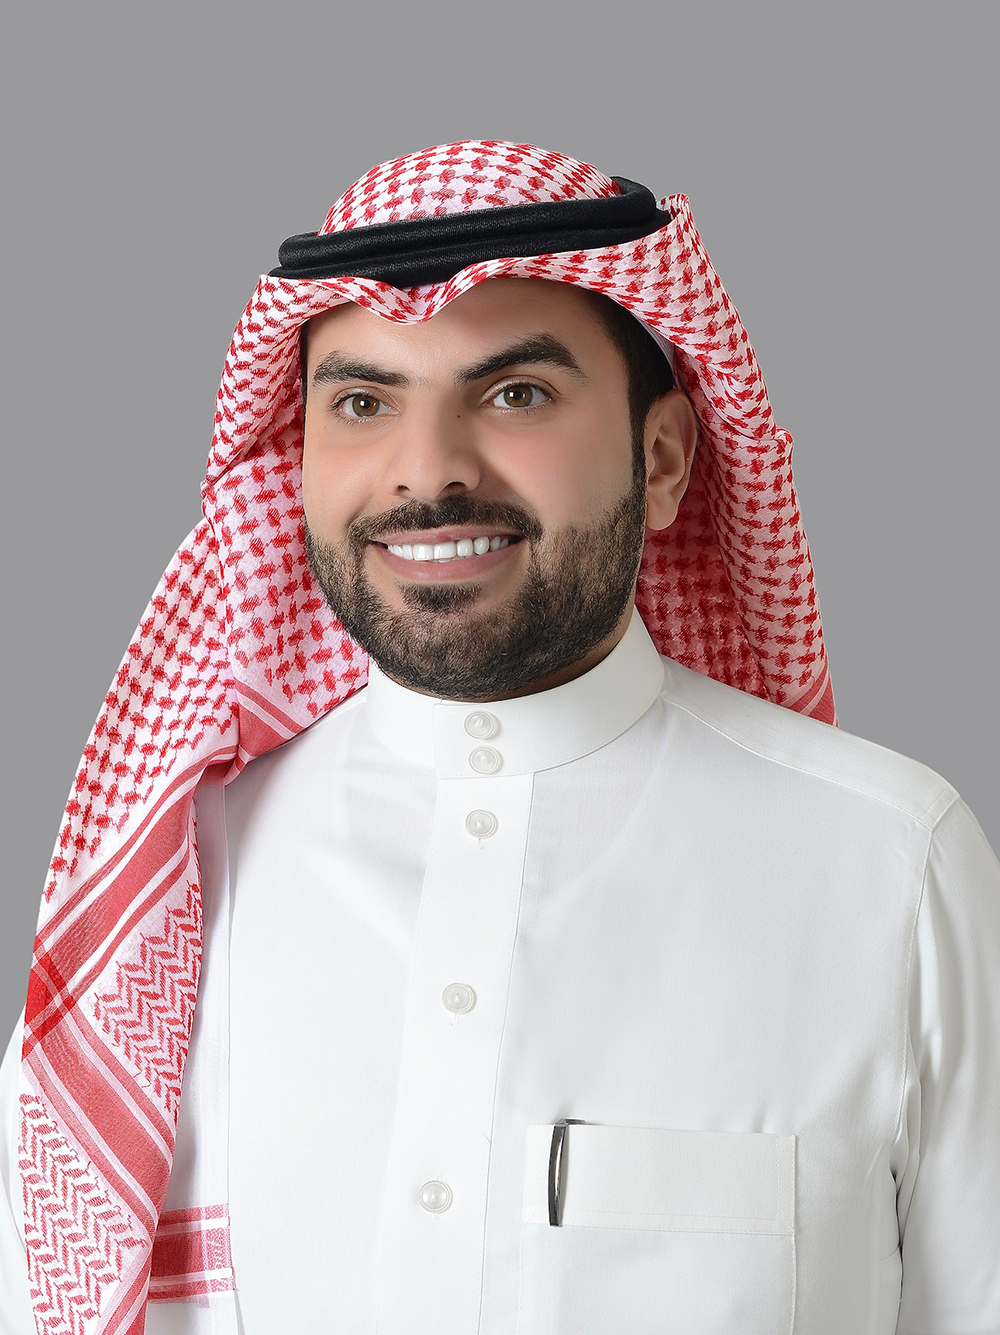 A10 Networks appoints new country manager for Kingdom of Saudi Arabia